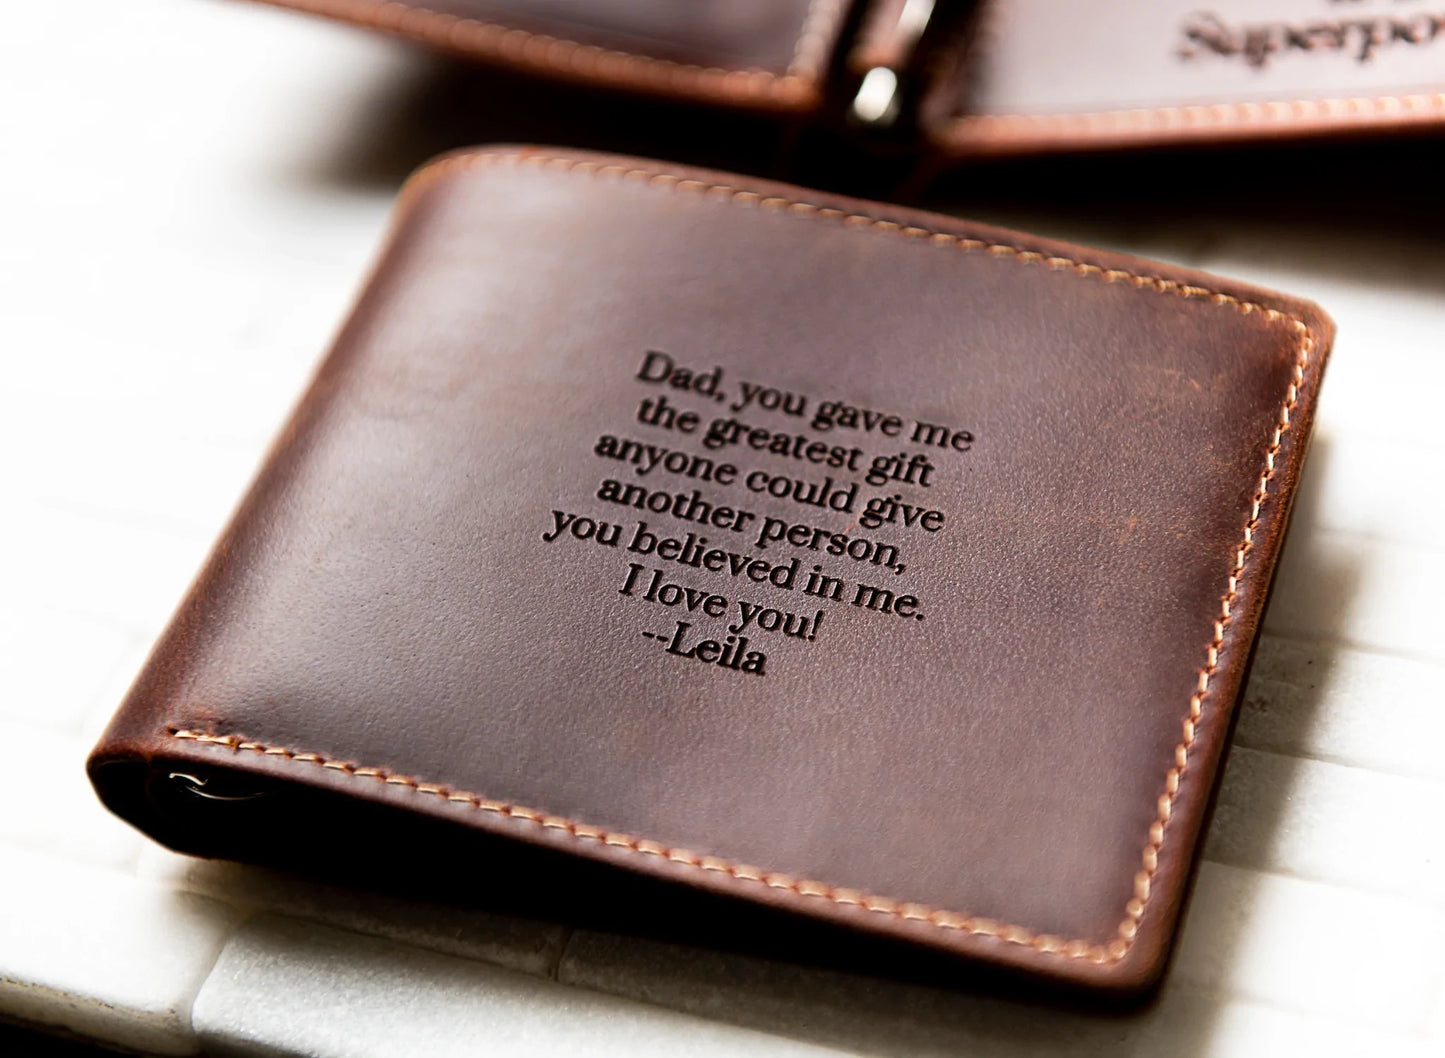 The Key Largo Personalized Leather Wallet